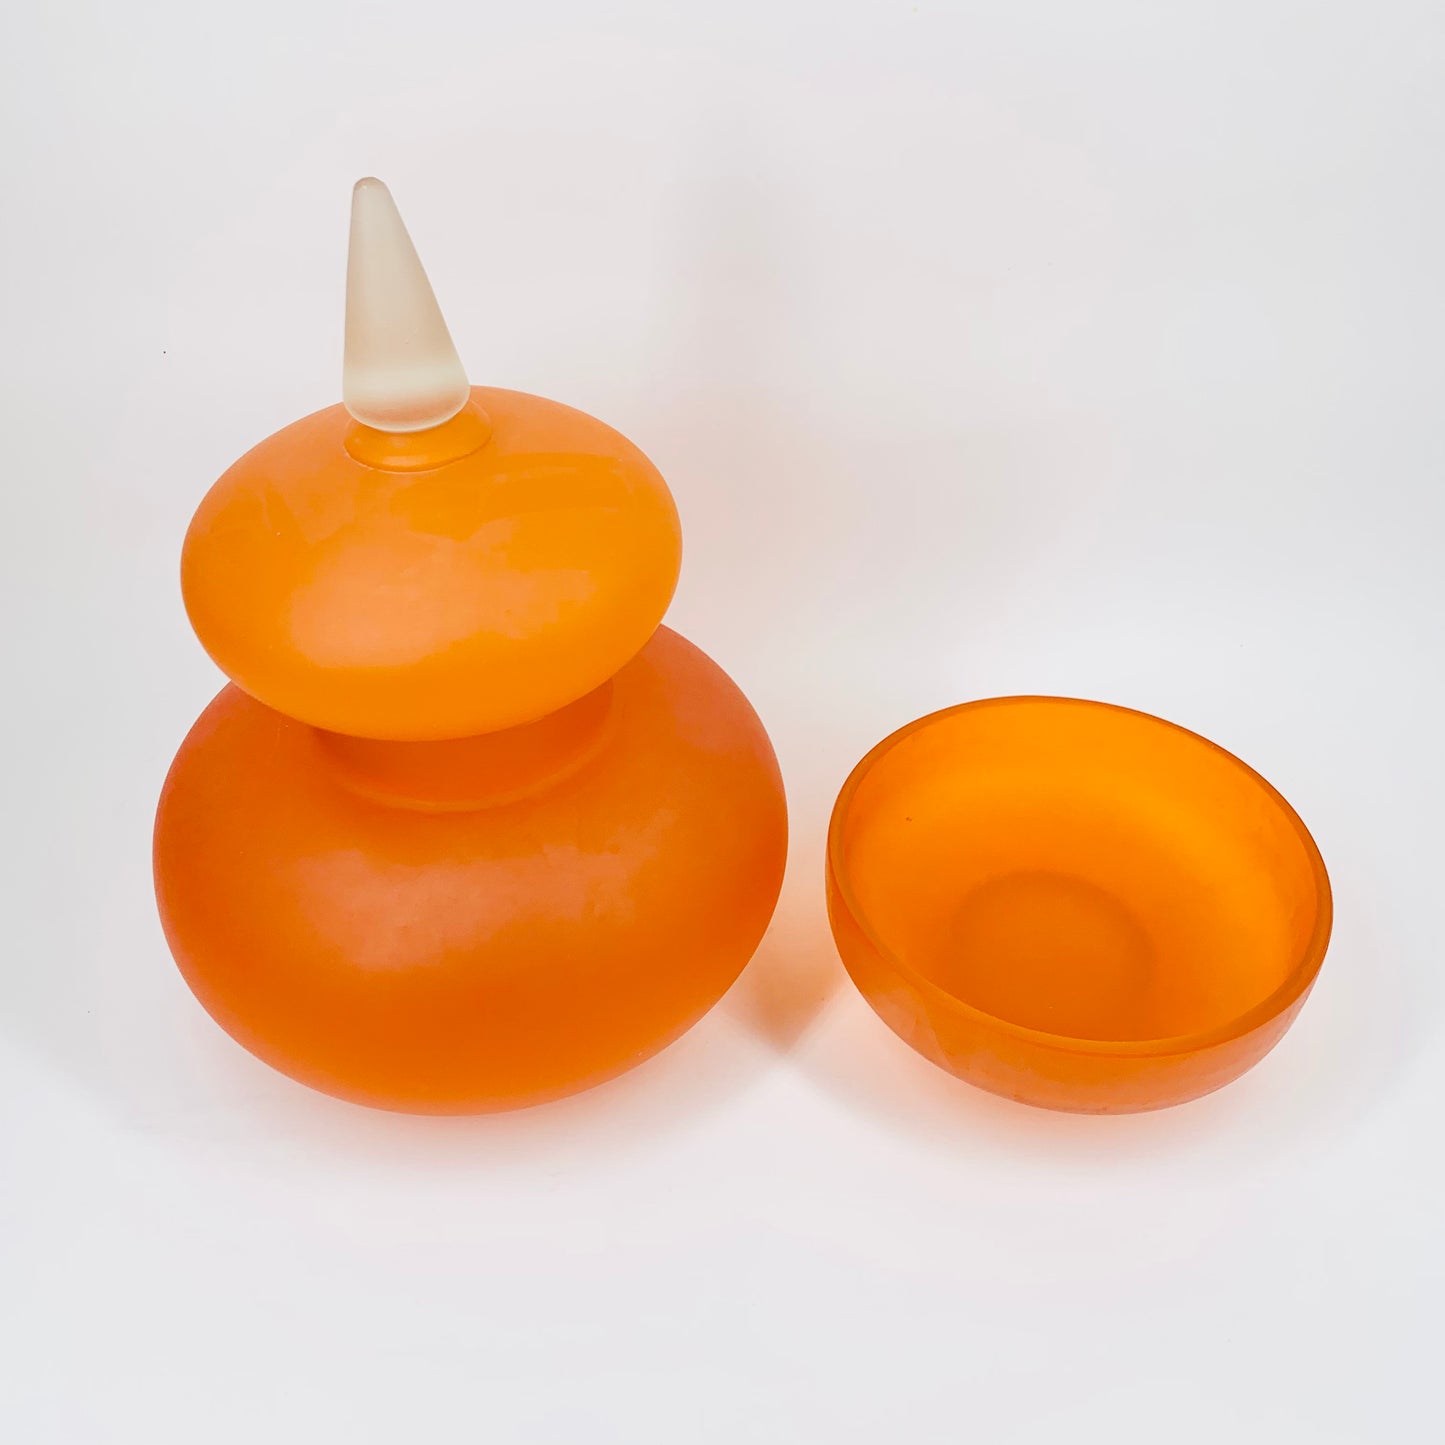 Extremely rare Midcentury Italian orange satin glass canister with minaret lid